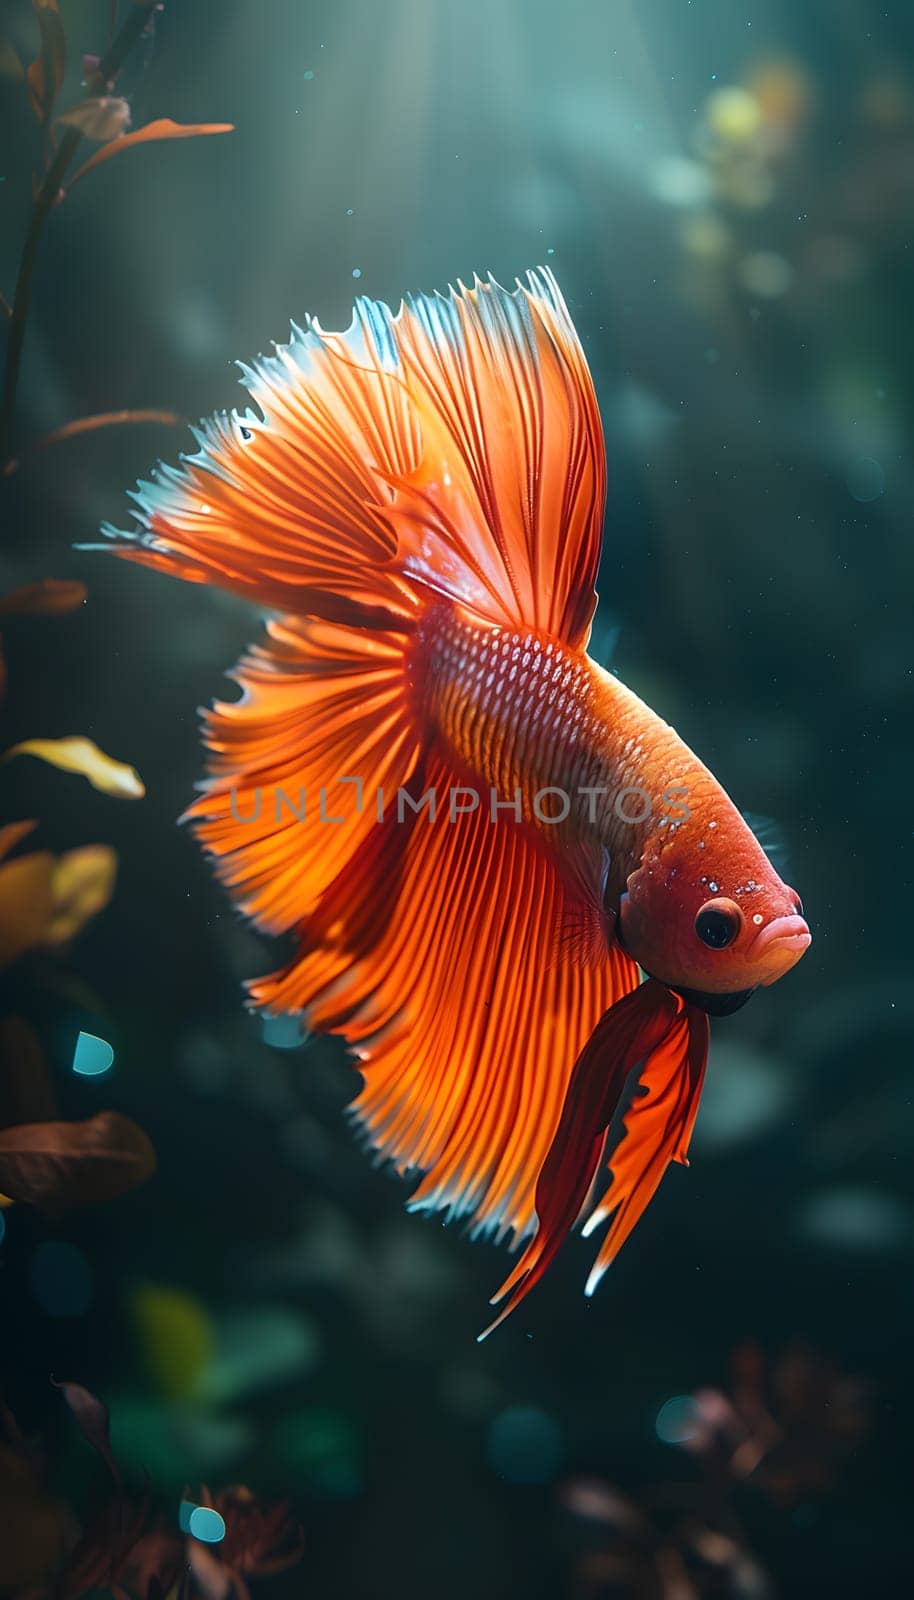 A red Betta fish is gracefully swimming among other organisms in an underwater tank, showcasing its vibrant fins and tail. The tank is filled with water and pet supplies for the fish